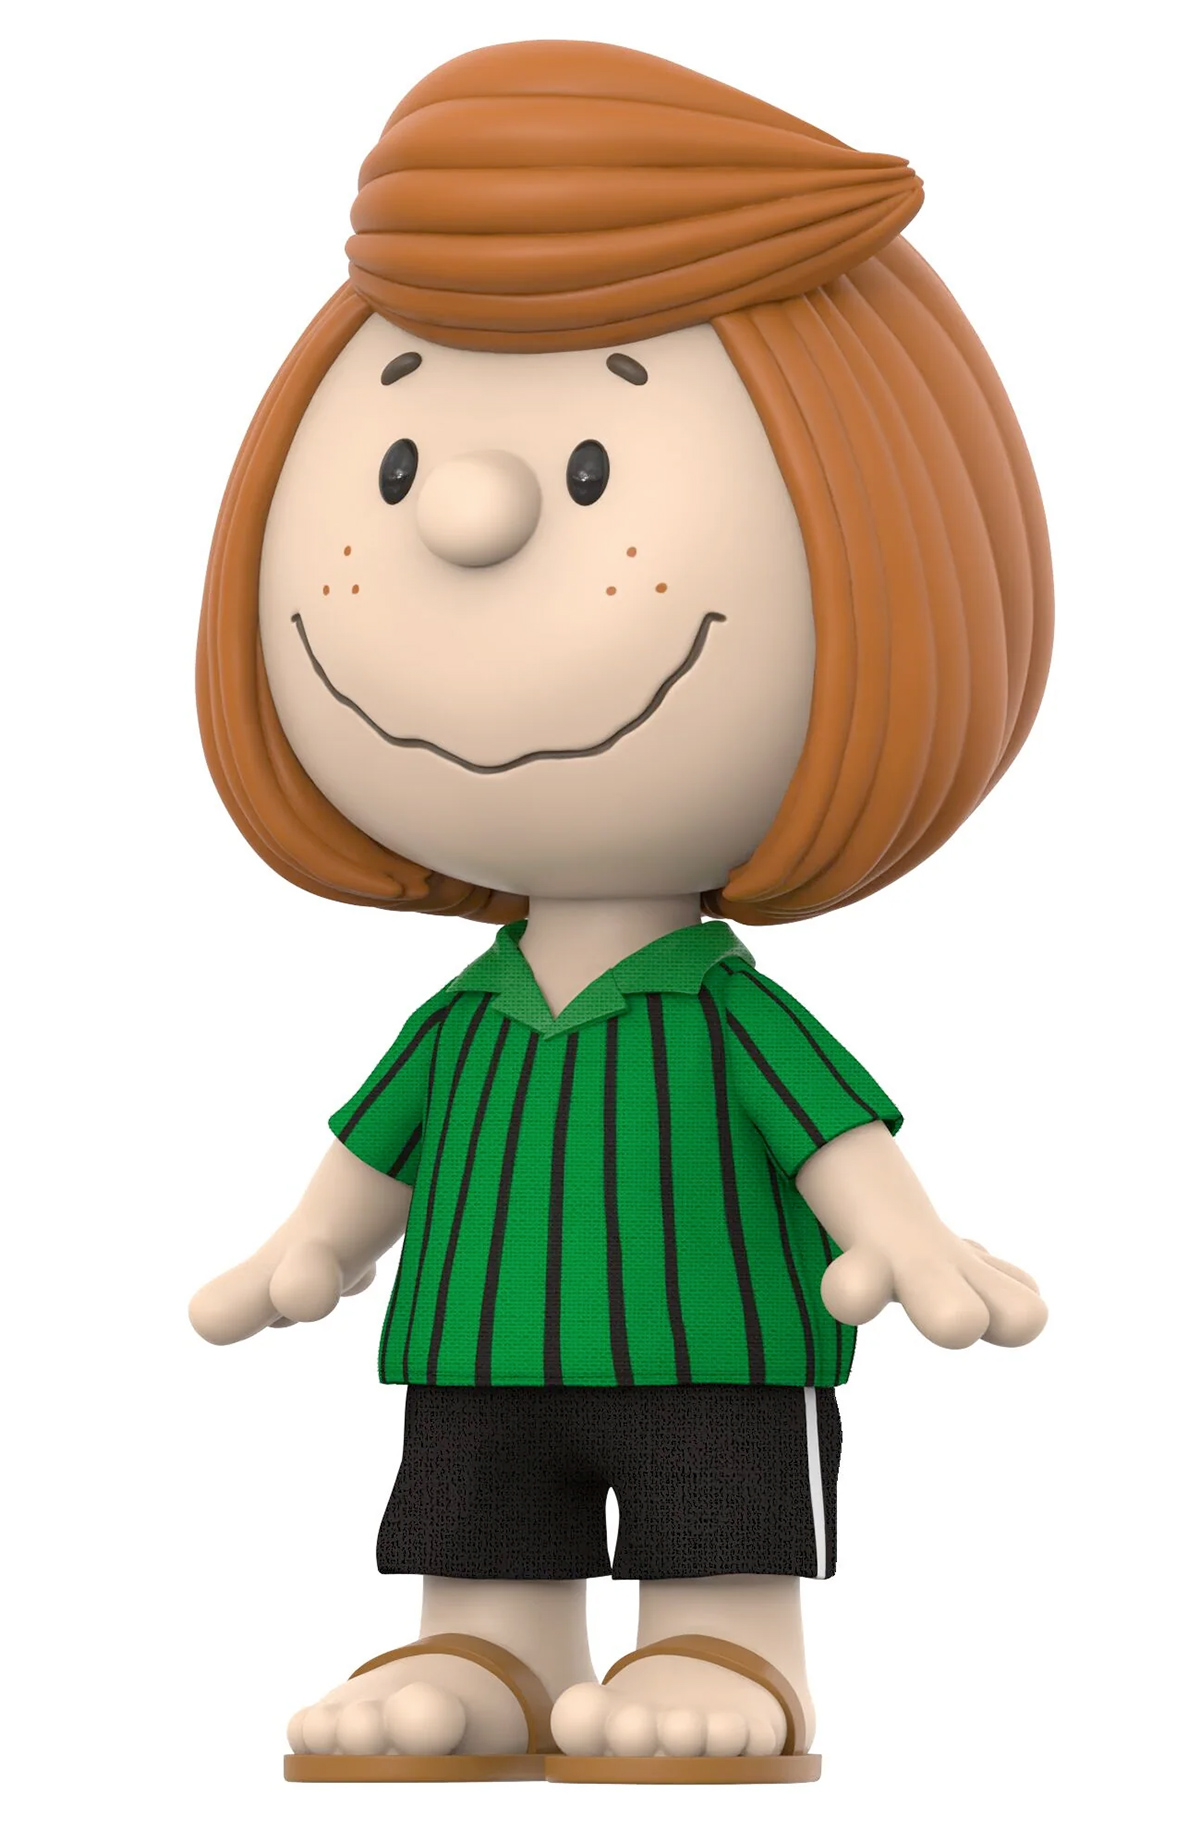 Giant Peanuts SuperSize Doll: Peppermint Patty